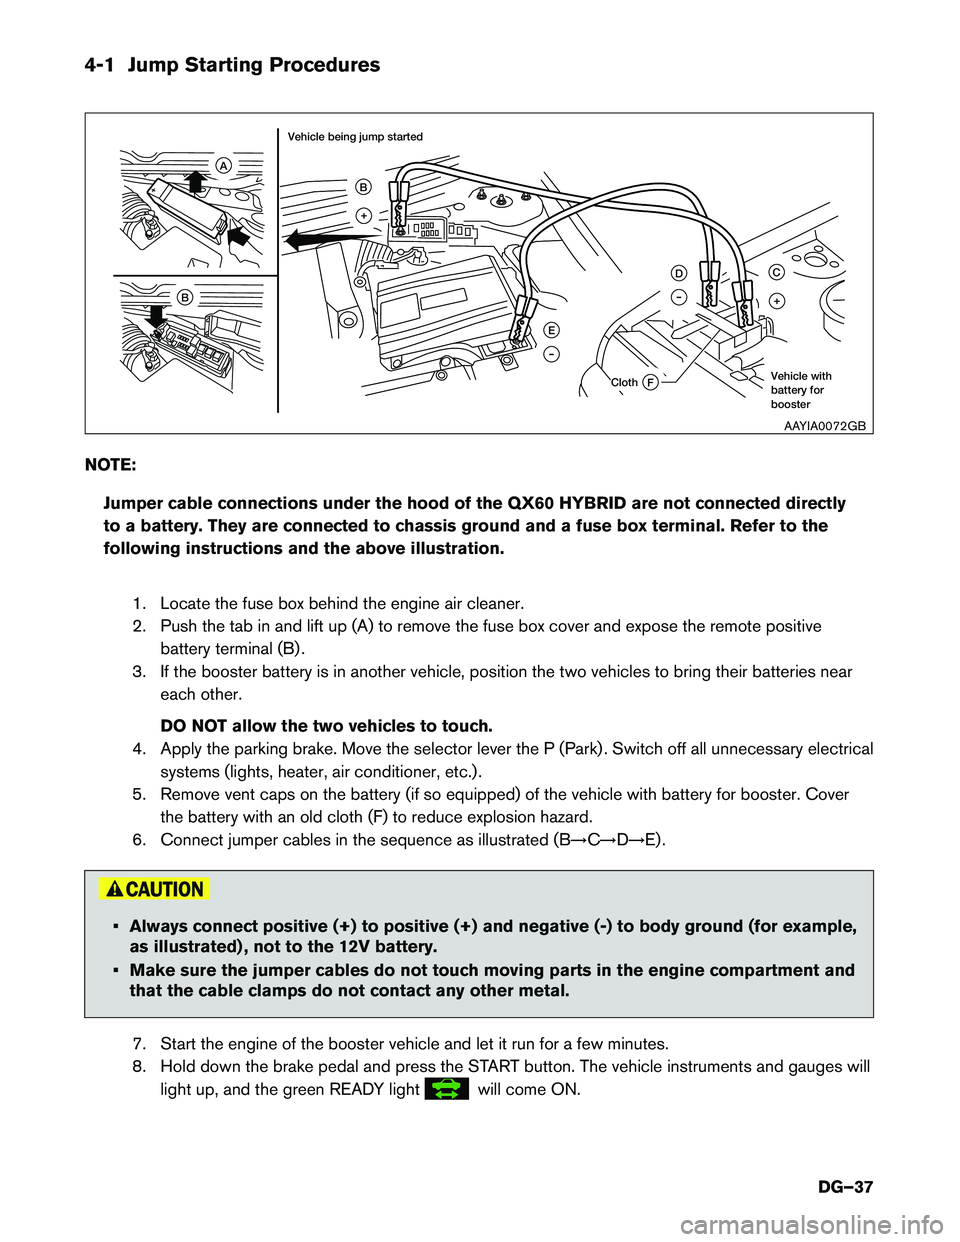 INFINITI QX60 HYBRID 2014  Dismantling Guide 4-1 Jump Starting Procedures 
NOTE:Jumper cable connections under the hood of the QX60 HYBRID are not connected directly 
to a battery. They are connected to chassis ground and a fuse box terminal. Re